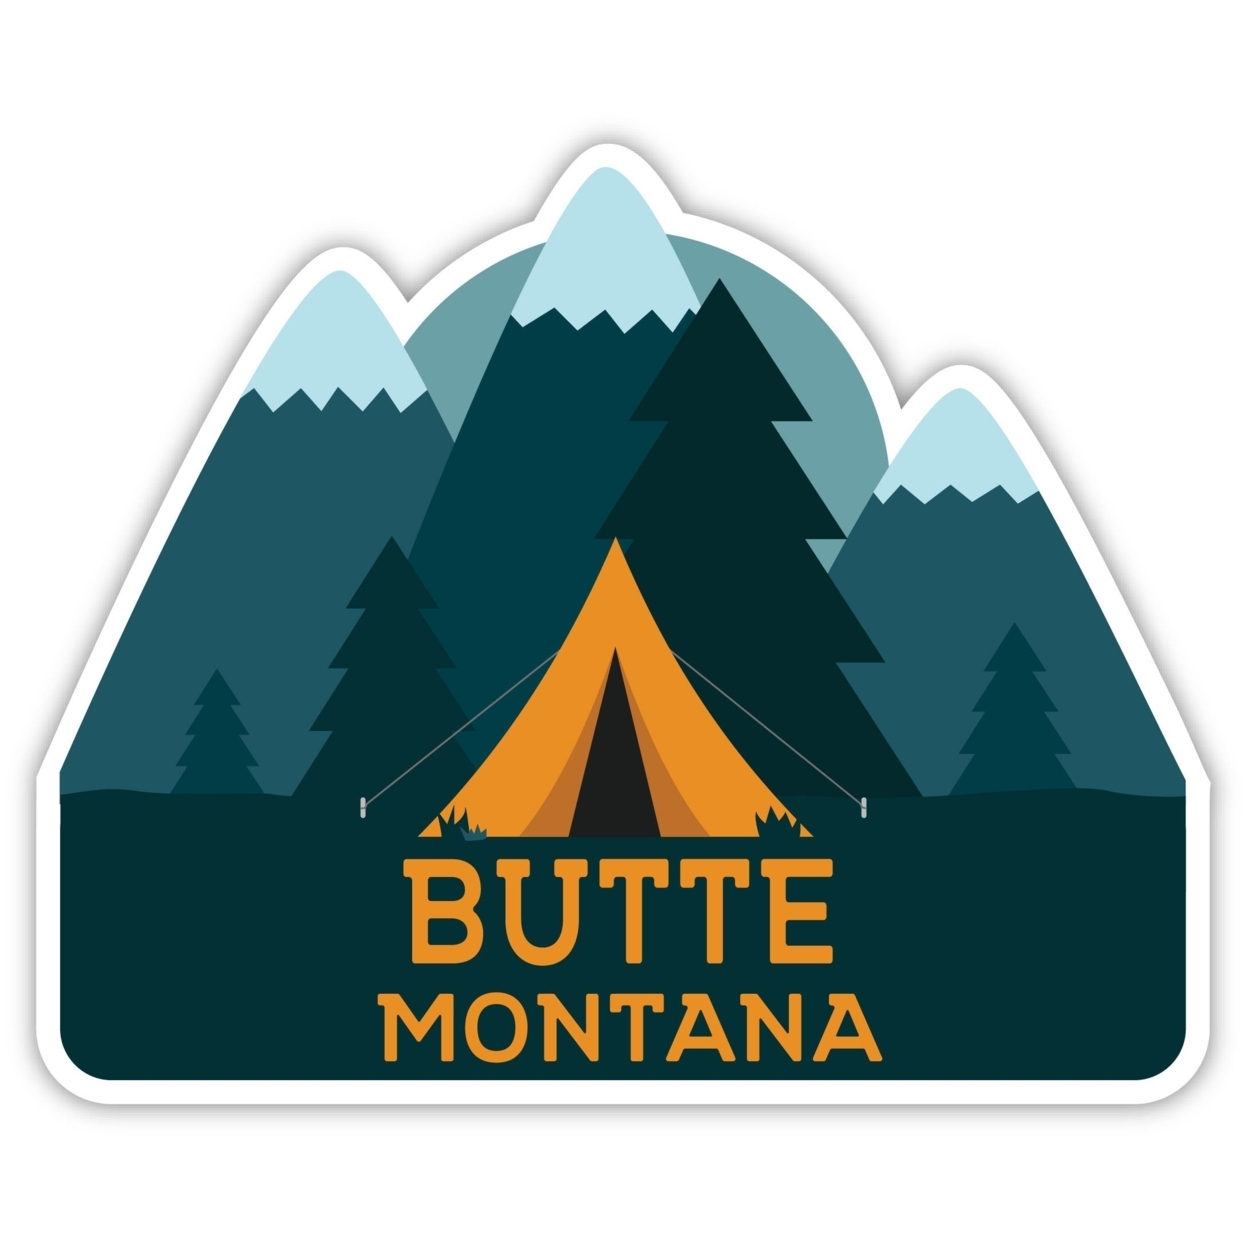 Butte Montana Souvenir Decorative Stickers (Choose Theme And Size) - Single Unit, 6-Inch, Great Outdoors